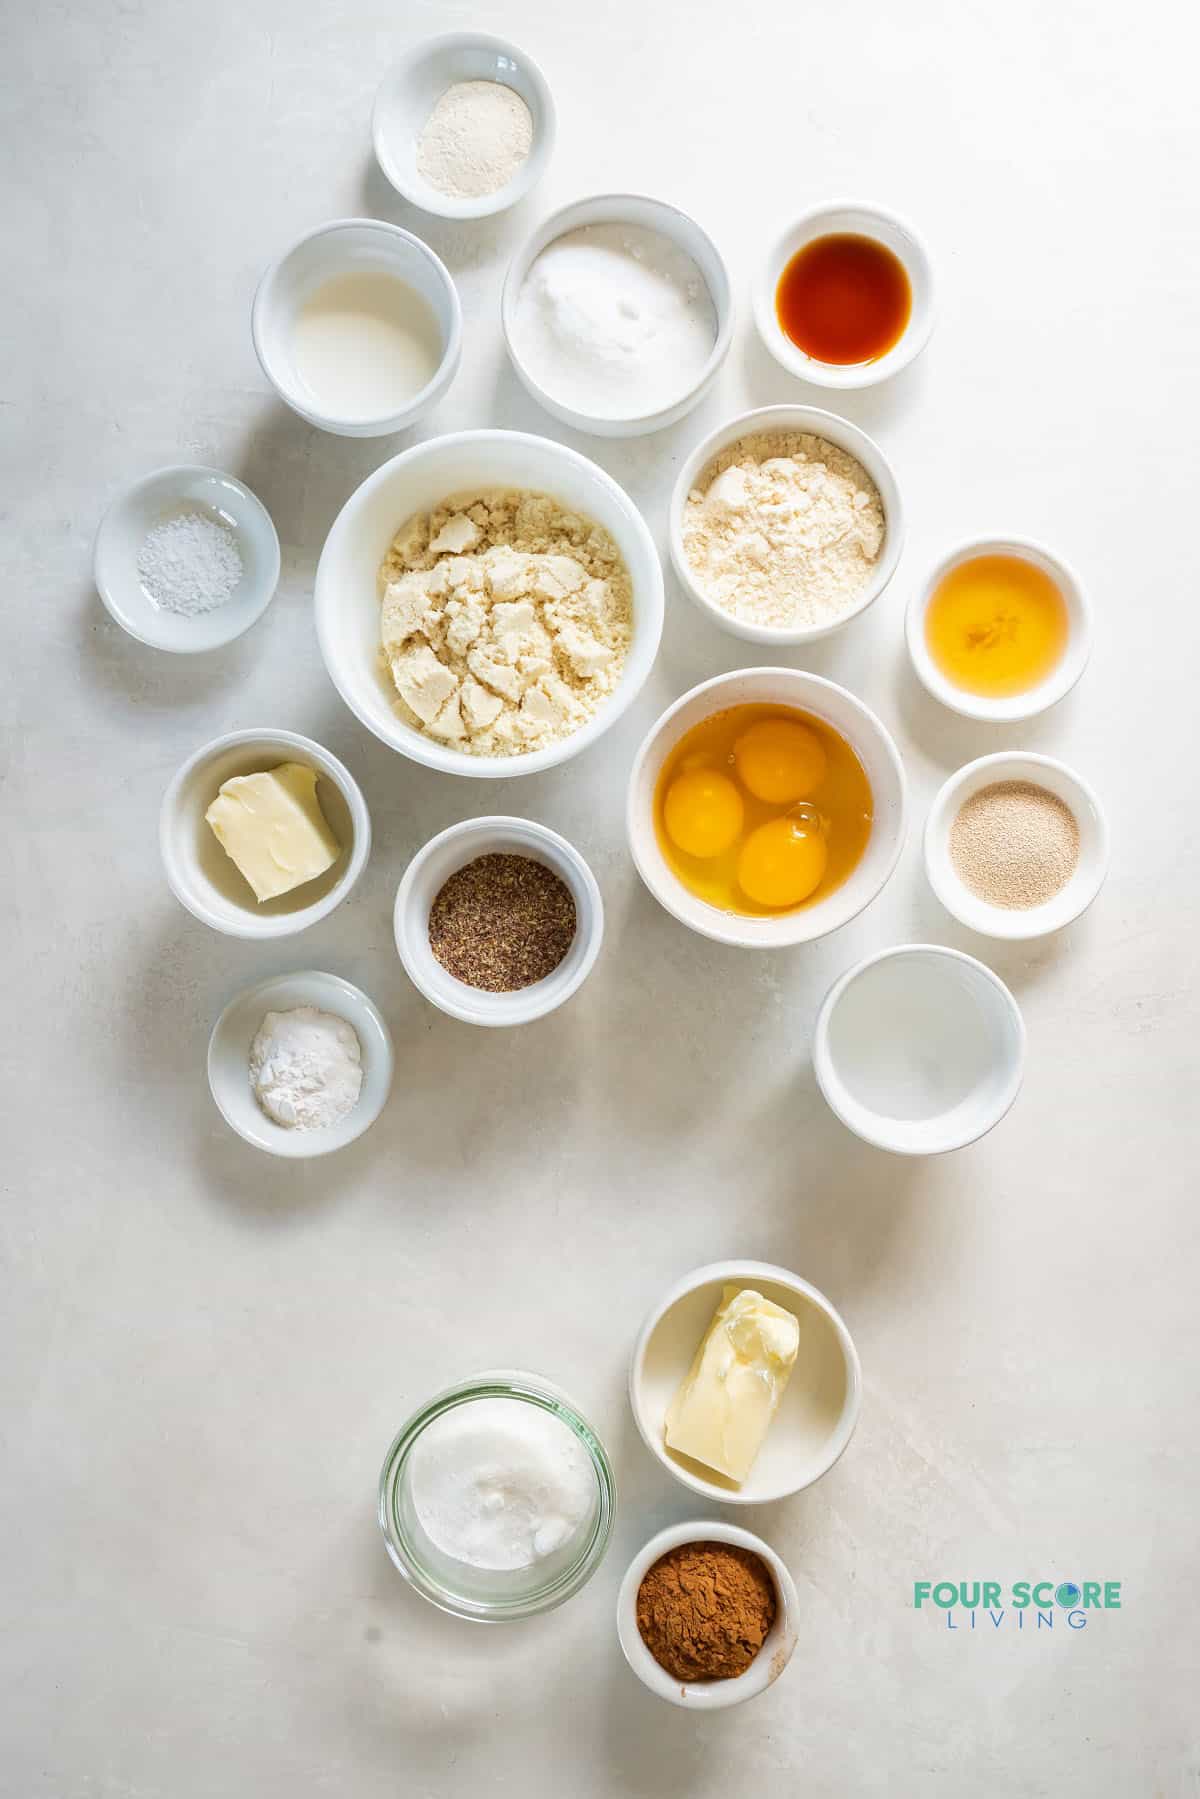 The ingredients needed to bake keto cinnamon rolls, all measured into small bowls on the counter, viewed from above.